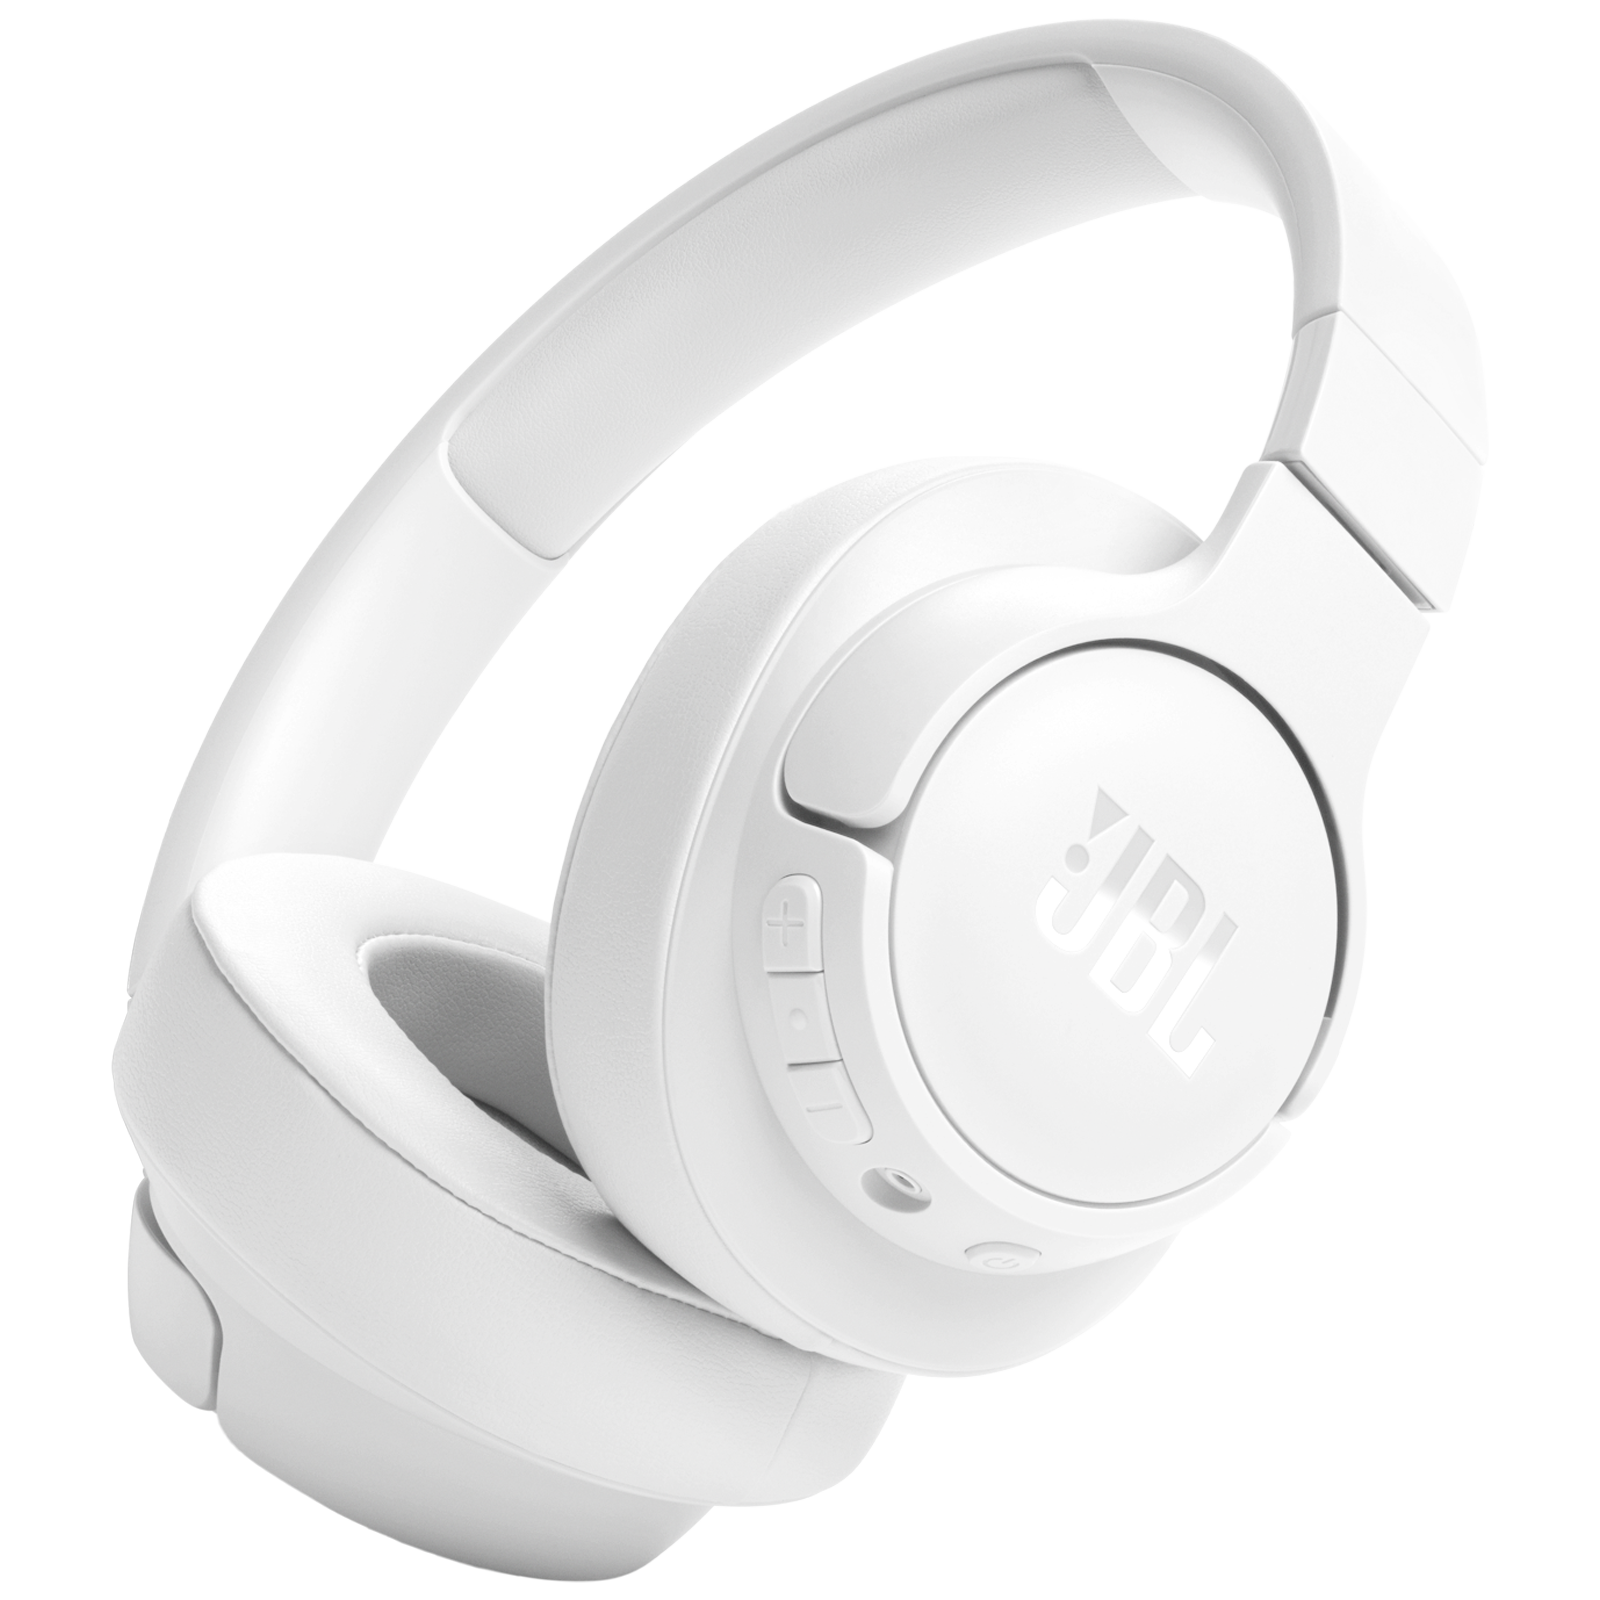 Buy White Wireless Headphones Online at Best Prices | Croma